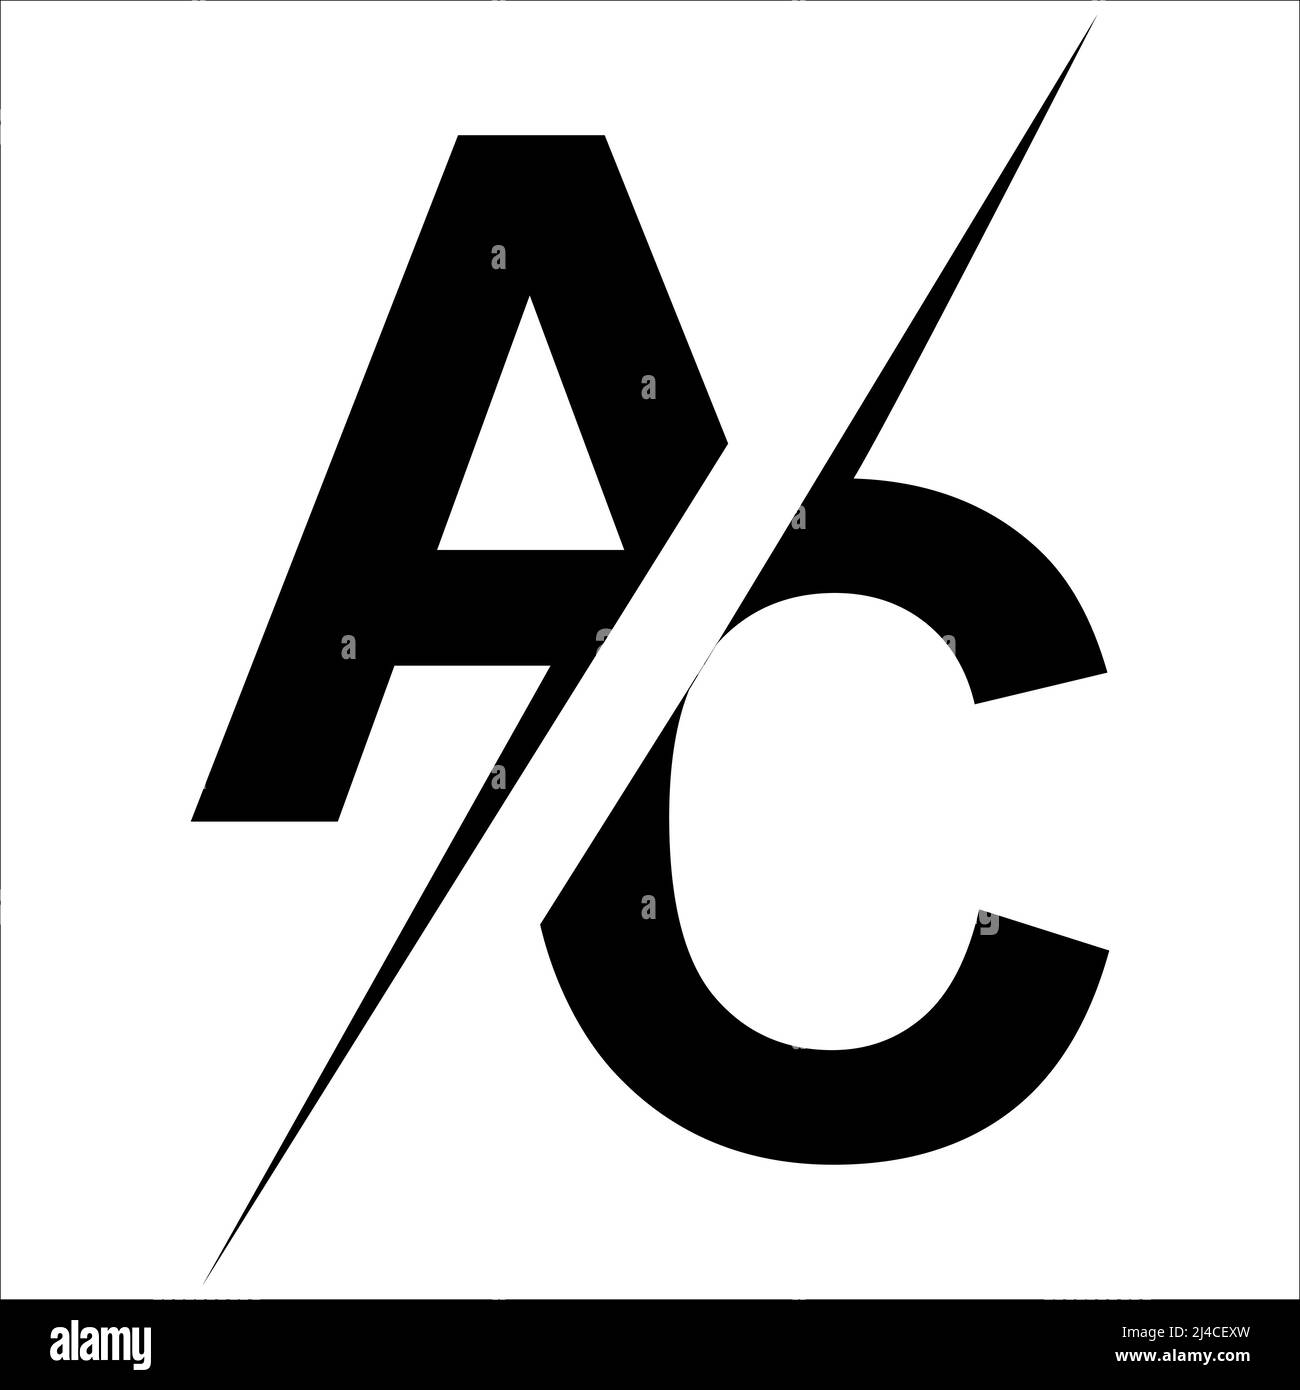 Letters A C ac logo separated diagonally by lightning strike a versus vs c ac Stock Vector